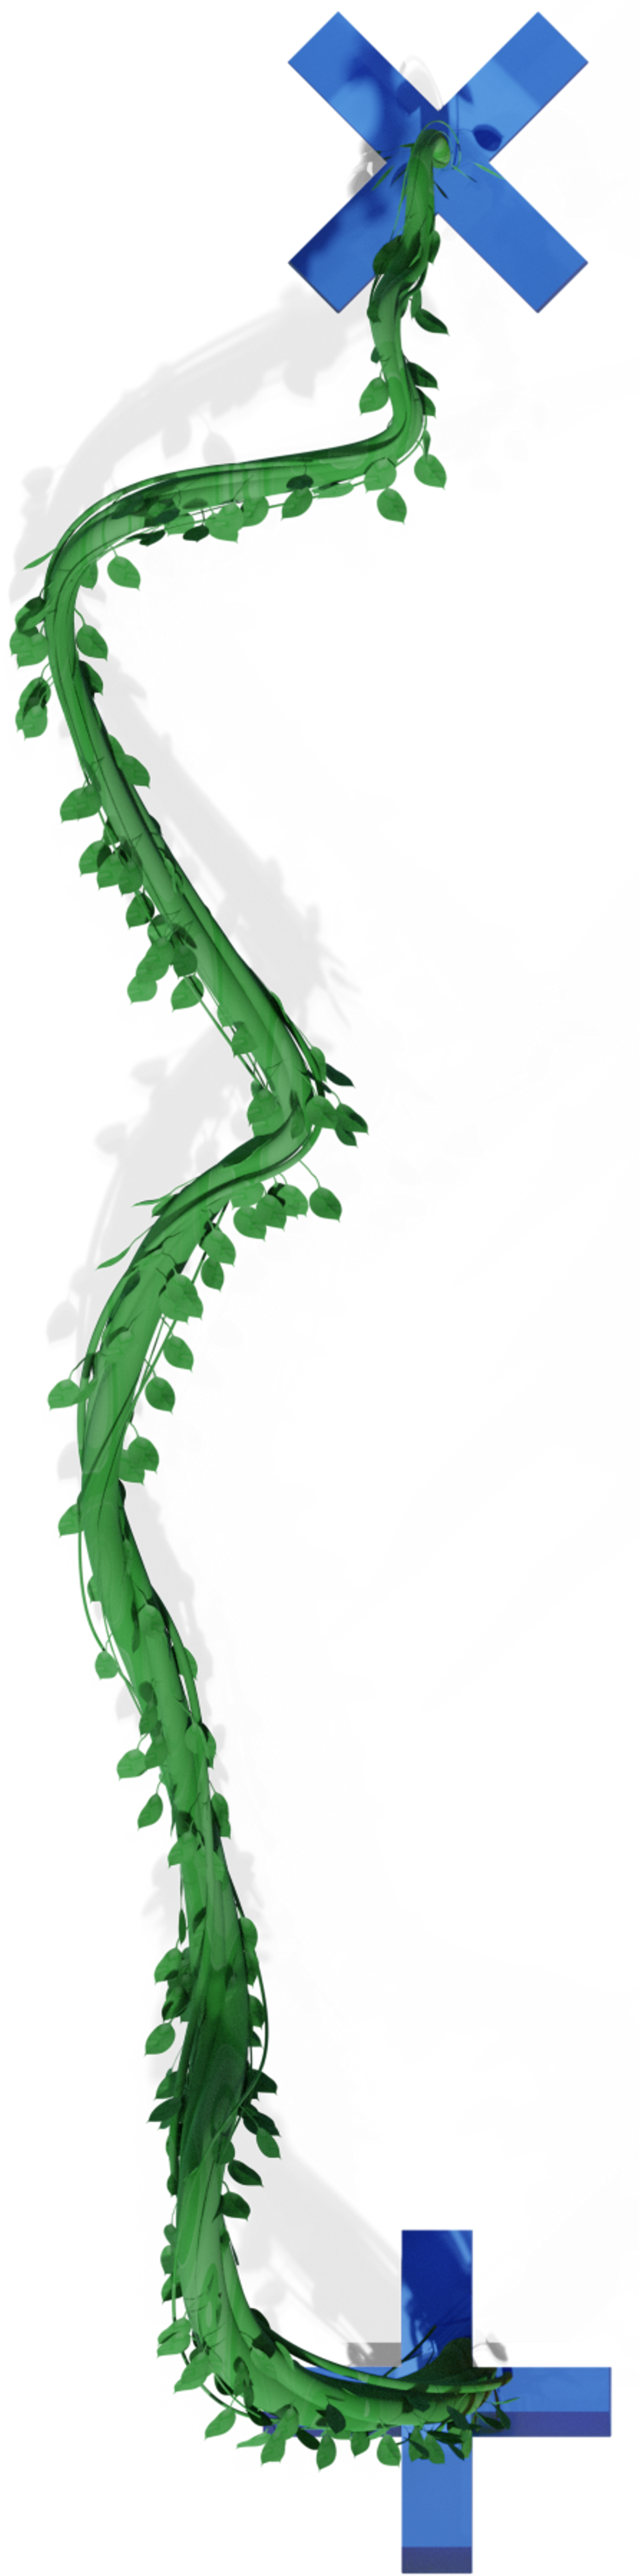 Beanstalk linking a multiplication sign and a plus sign vertically